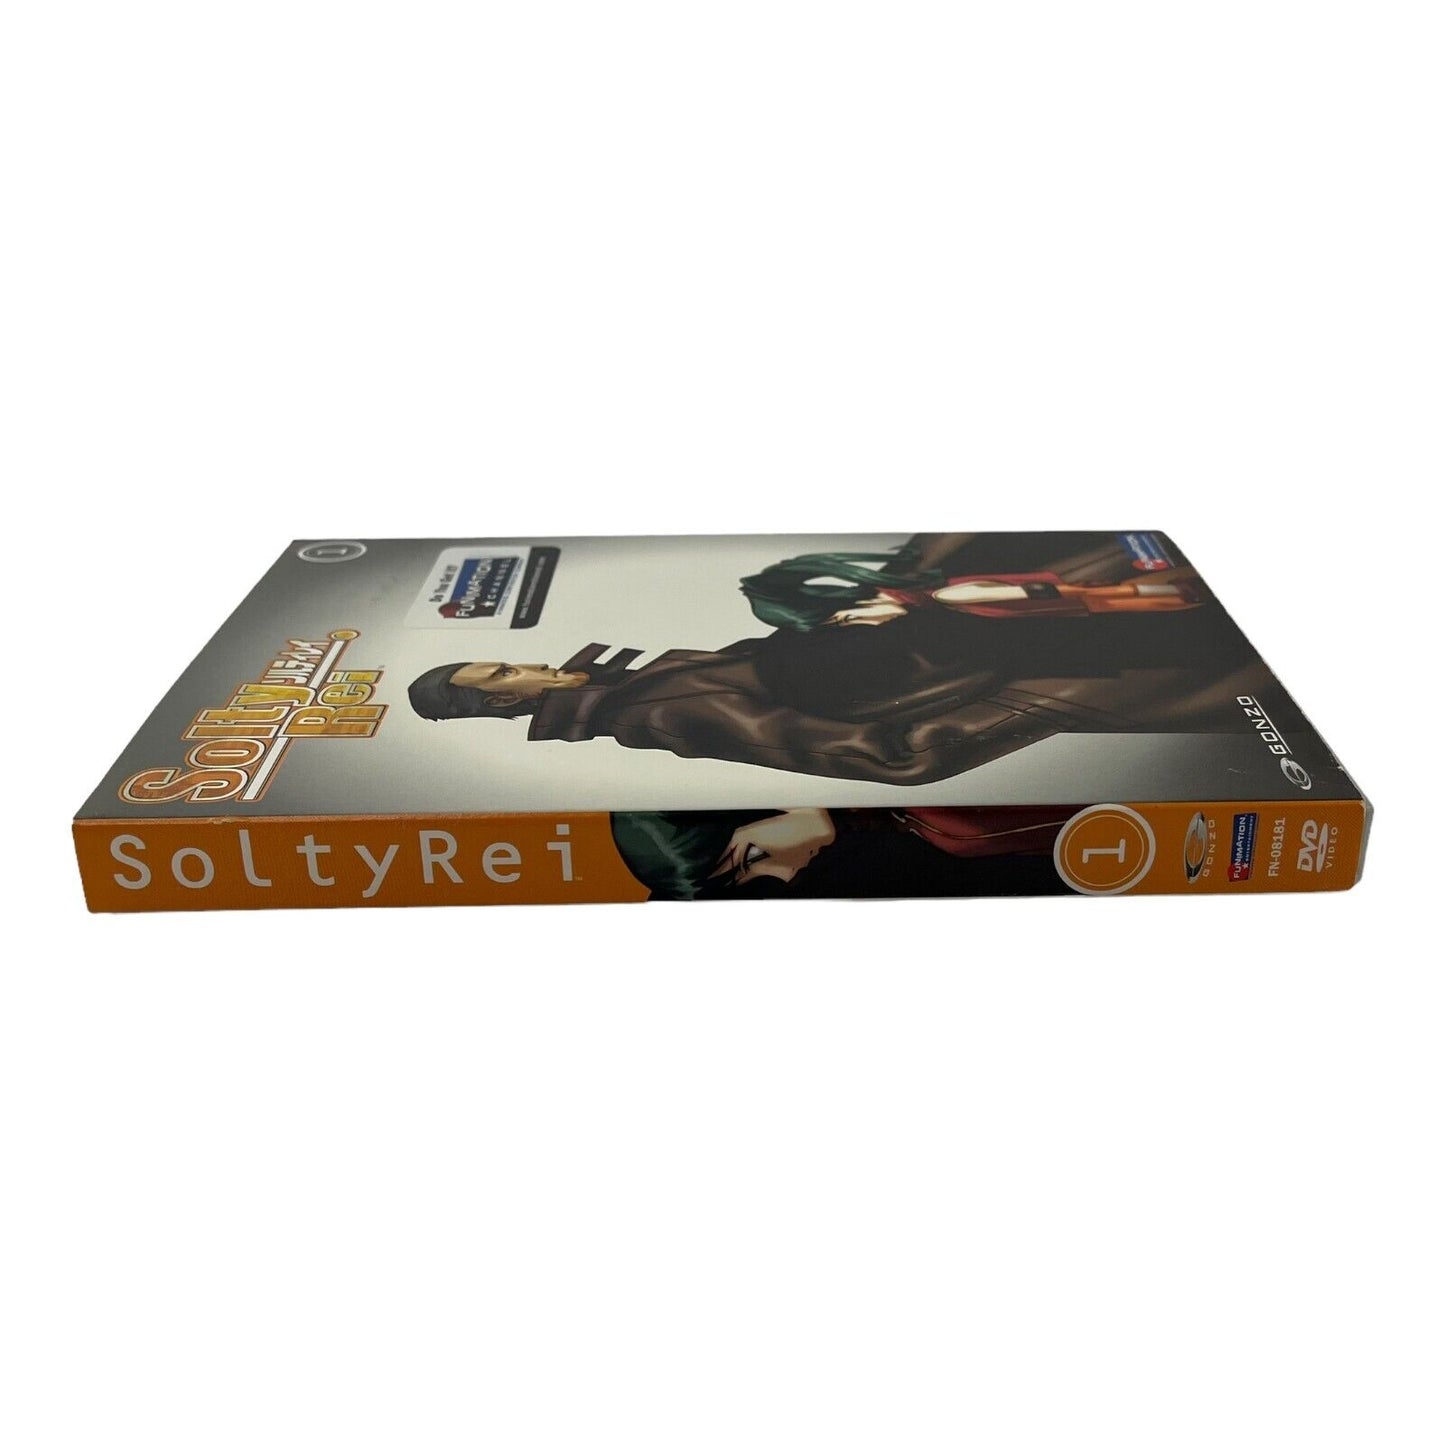 Solty Rei Volume 1 DVD Anime Funimation Gonzo with Slipcover